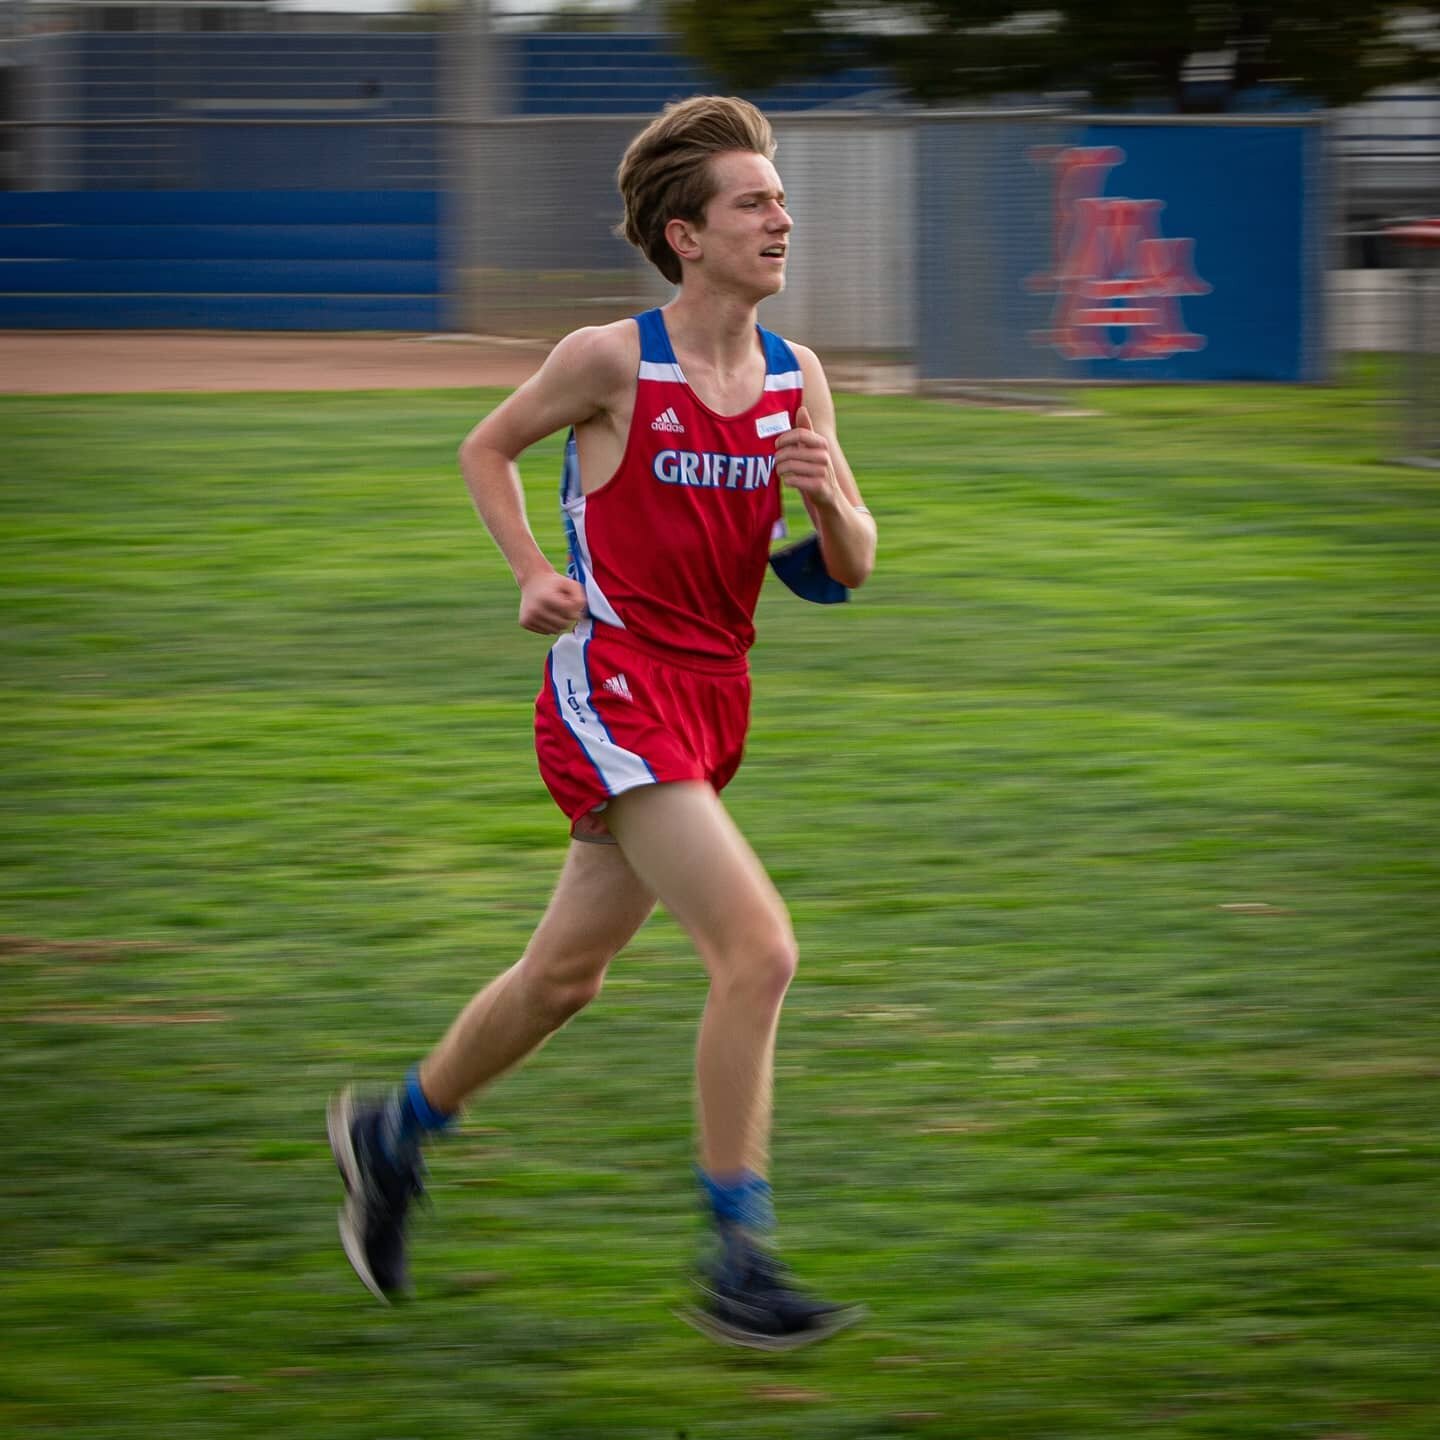 Los Alamitos Cross Country vs. Newport Harbor

Photography assignments this week took me to @losalamitoshigh, where @losalxc had their second meet of the season against Newport Harbor. Due to COVID-19 restrictions, races were held on the school's cam